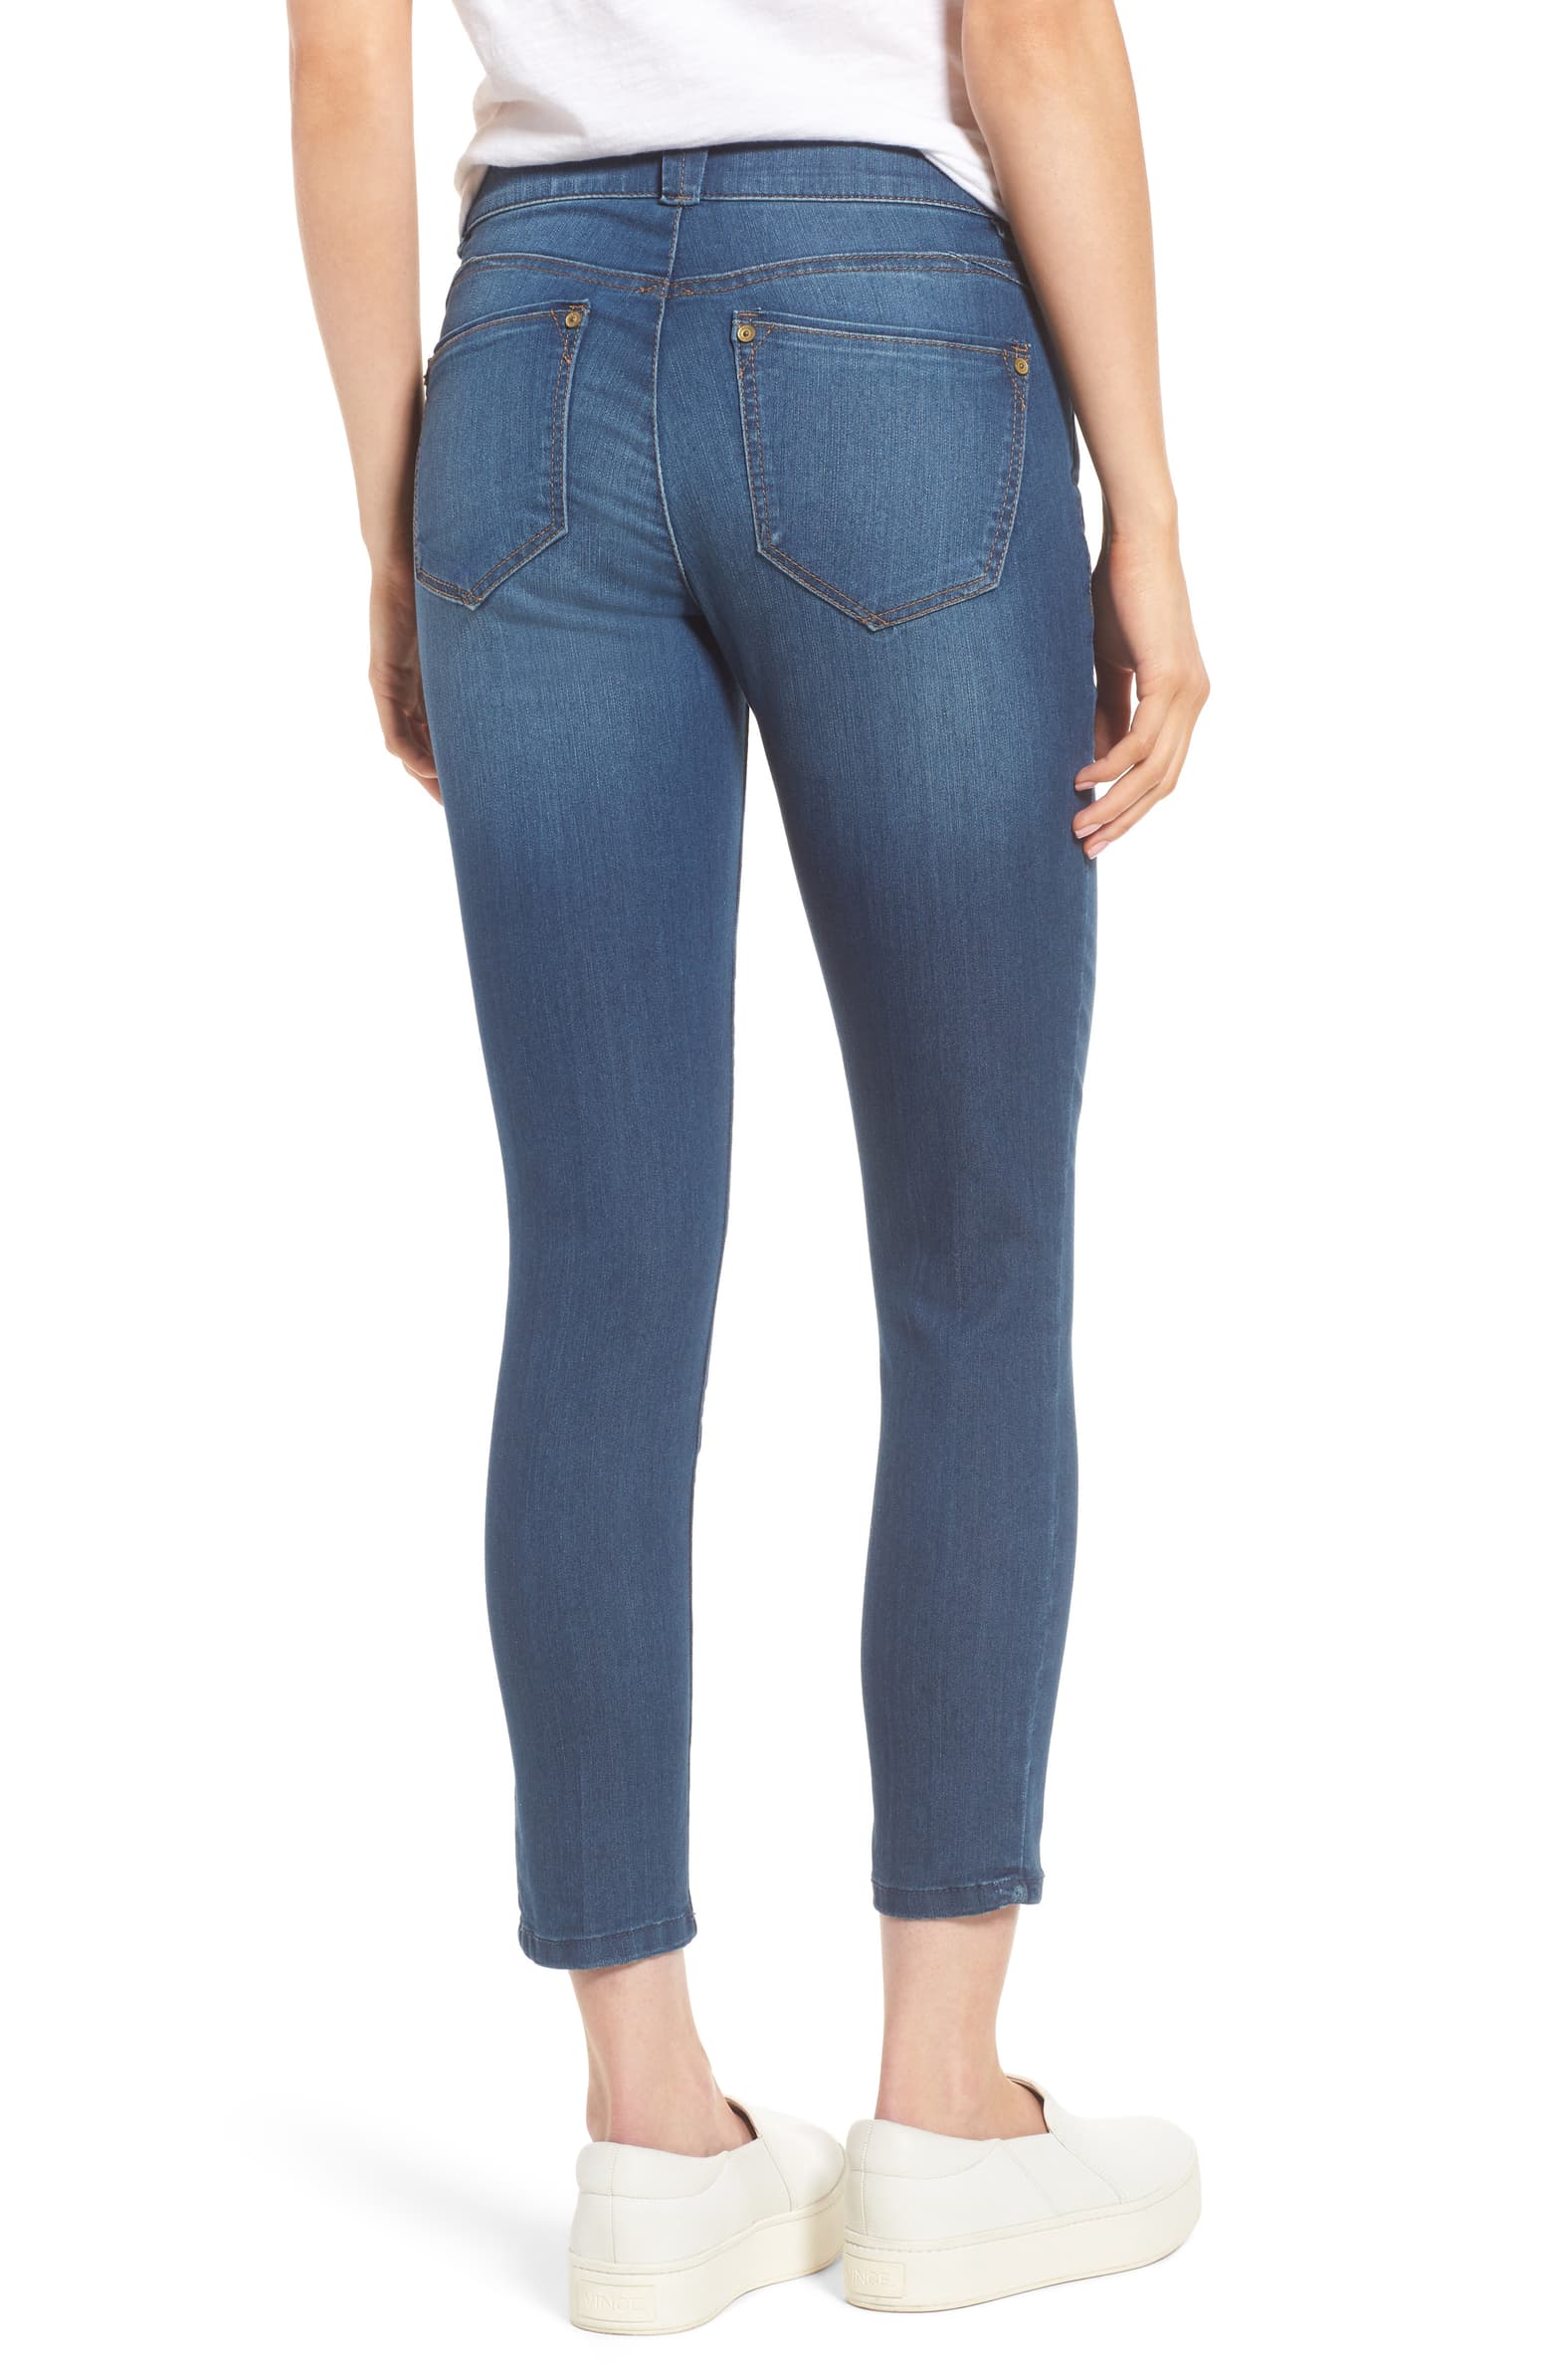 These Super Affordable Jeans Make Your Legs Look Slimmer And Your ...